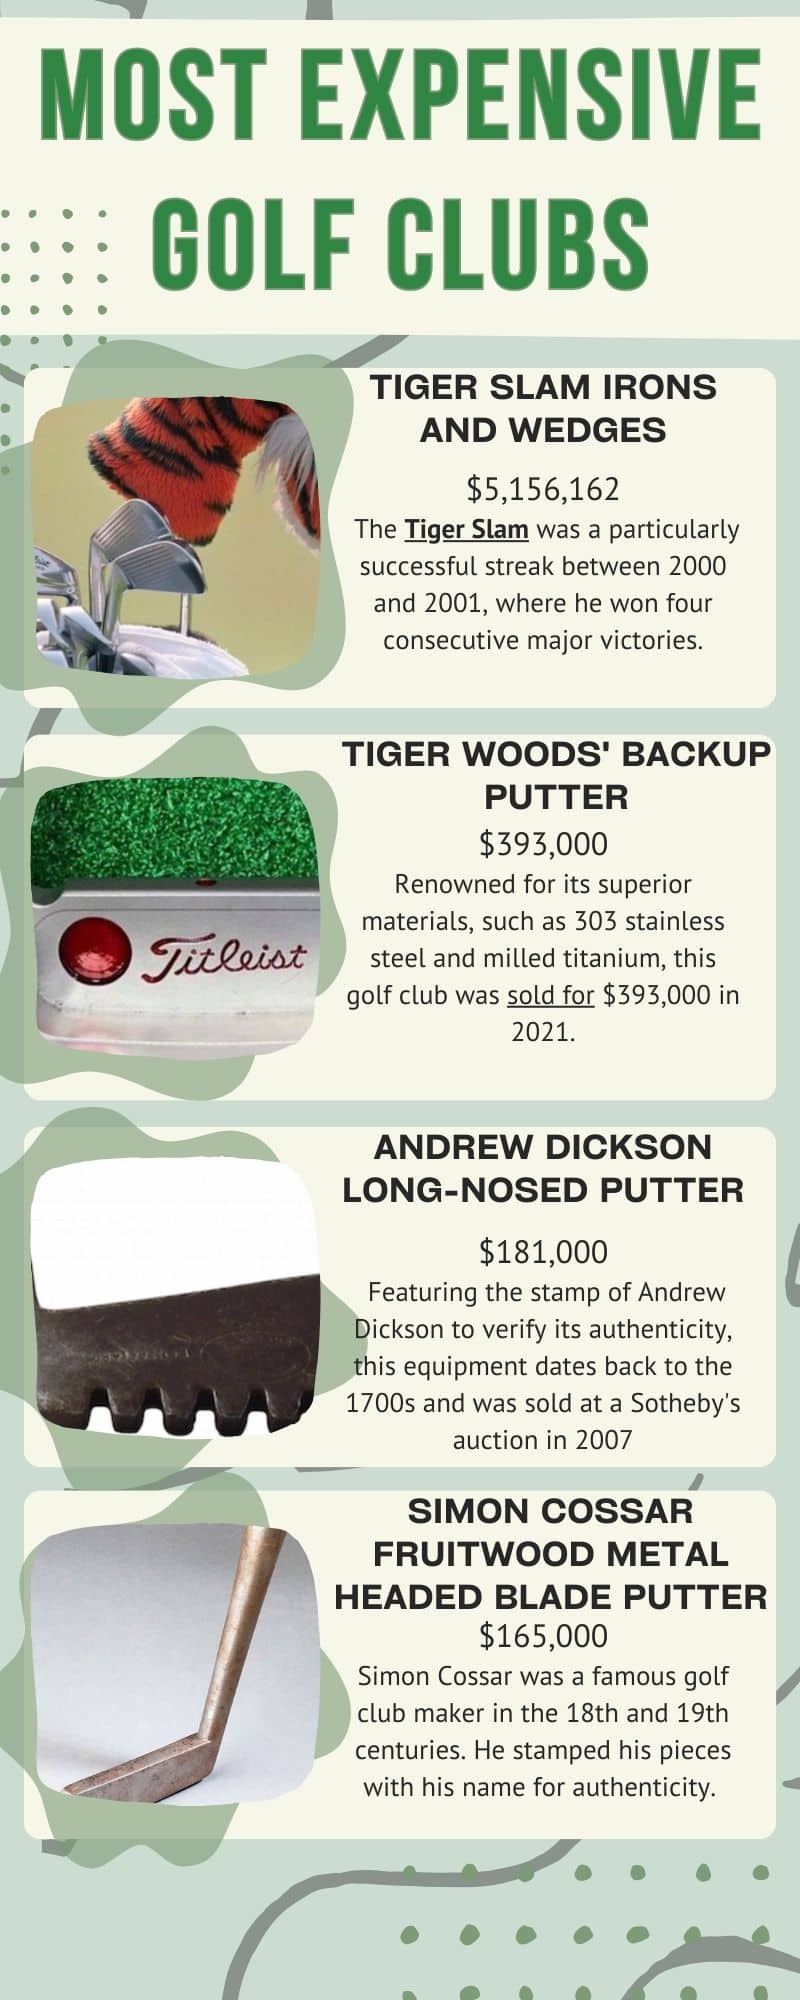 The most expensive golf clubs